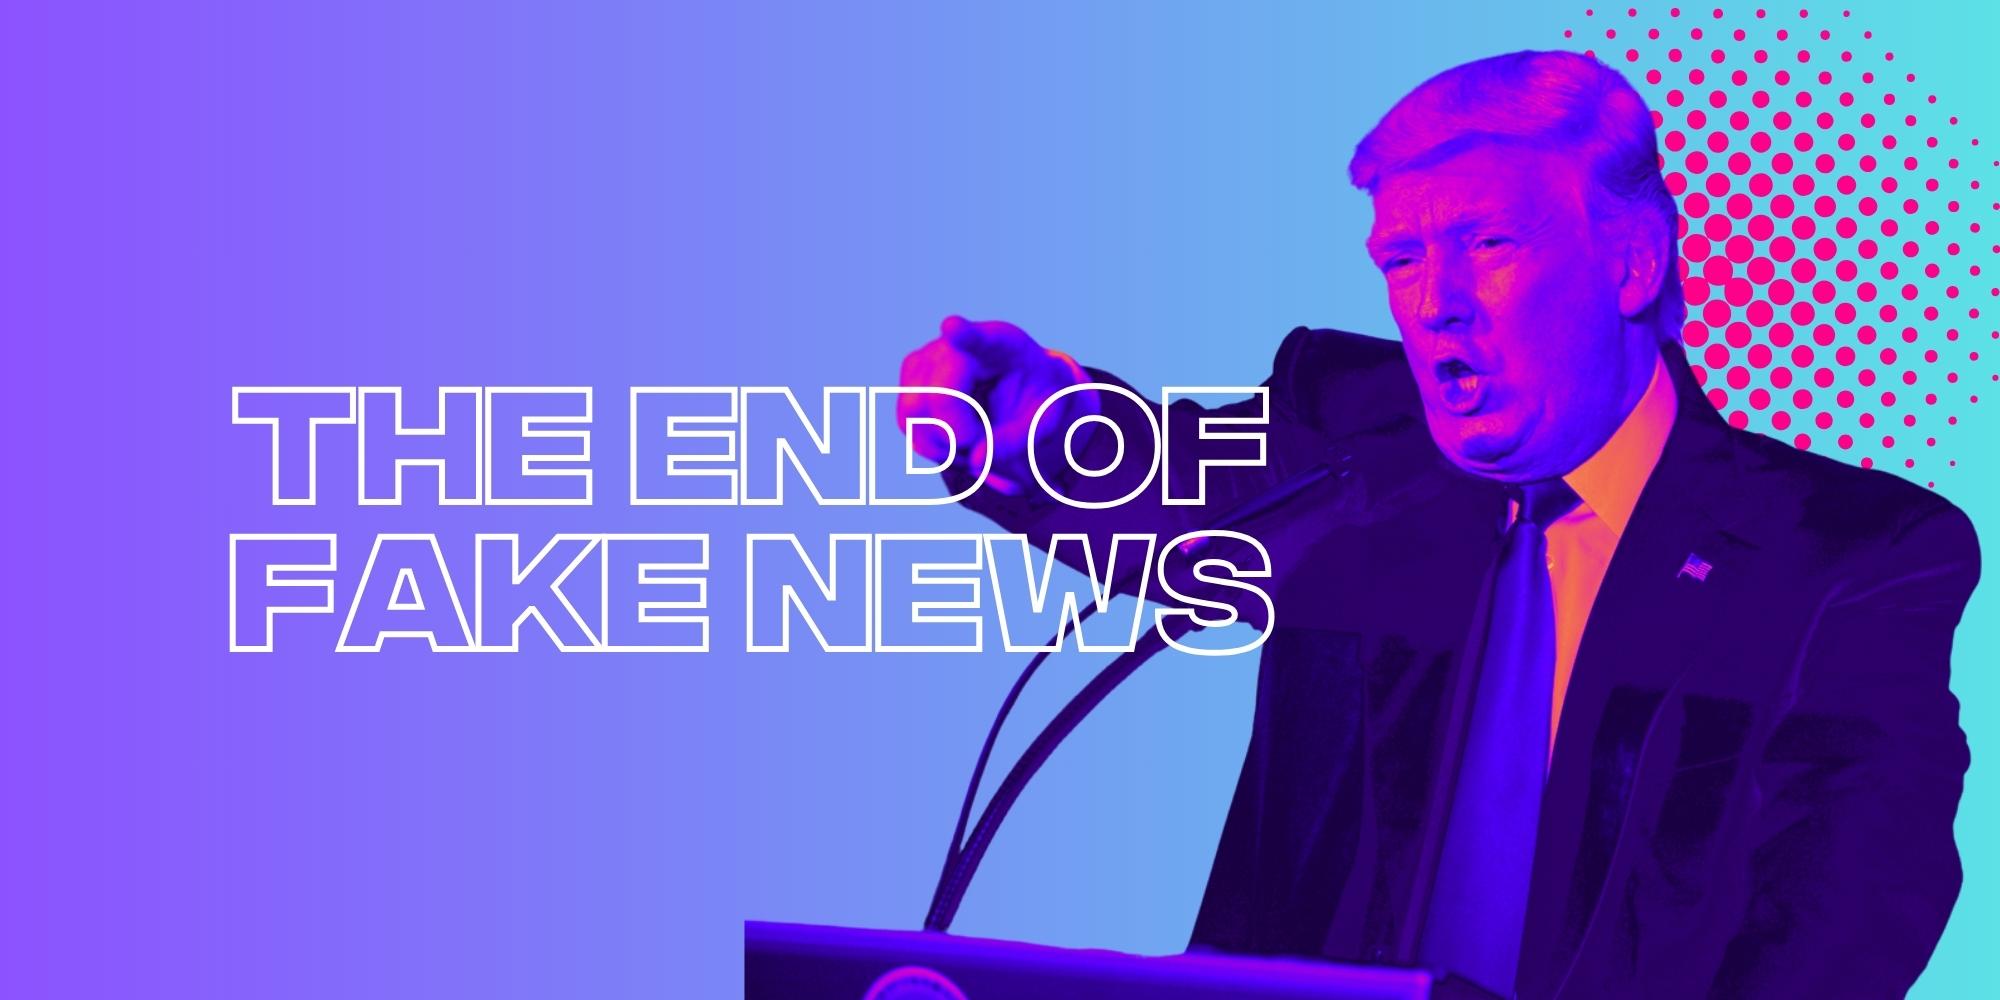 Is The End Of Fake News On The Horizon?